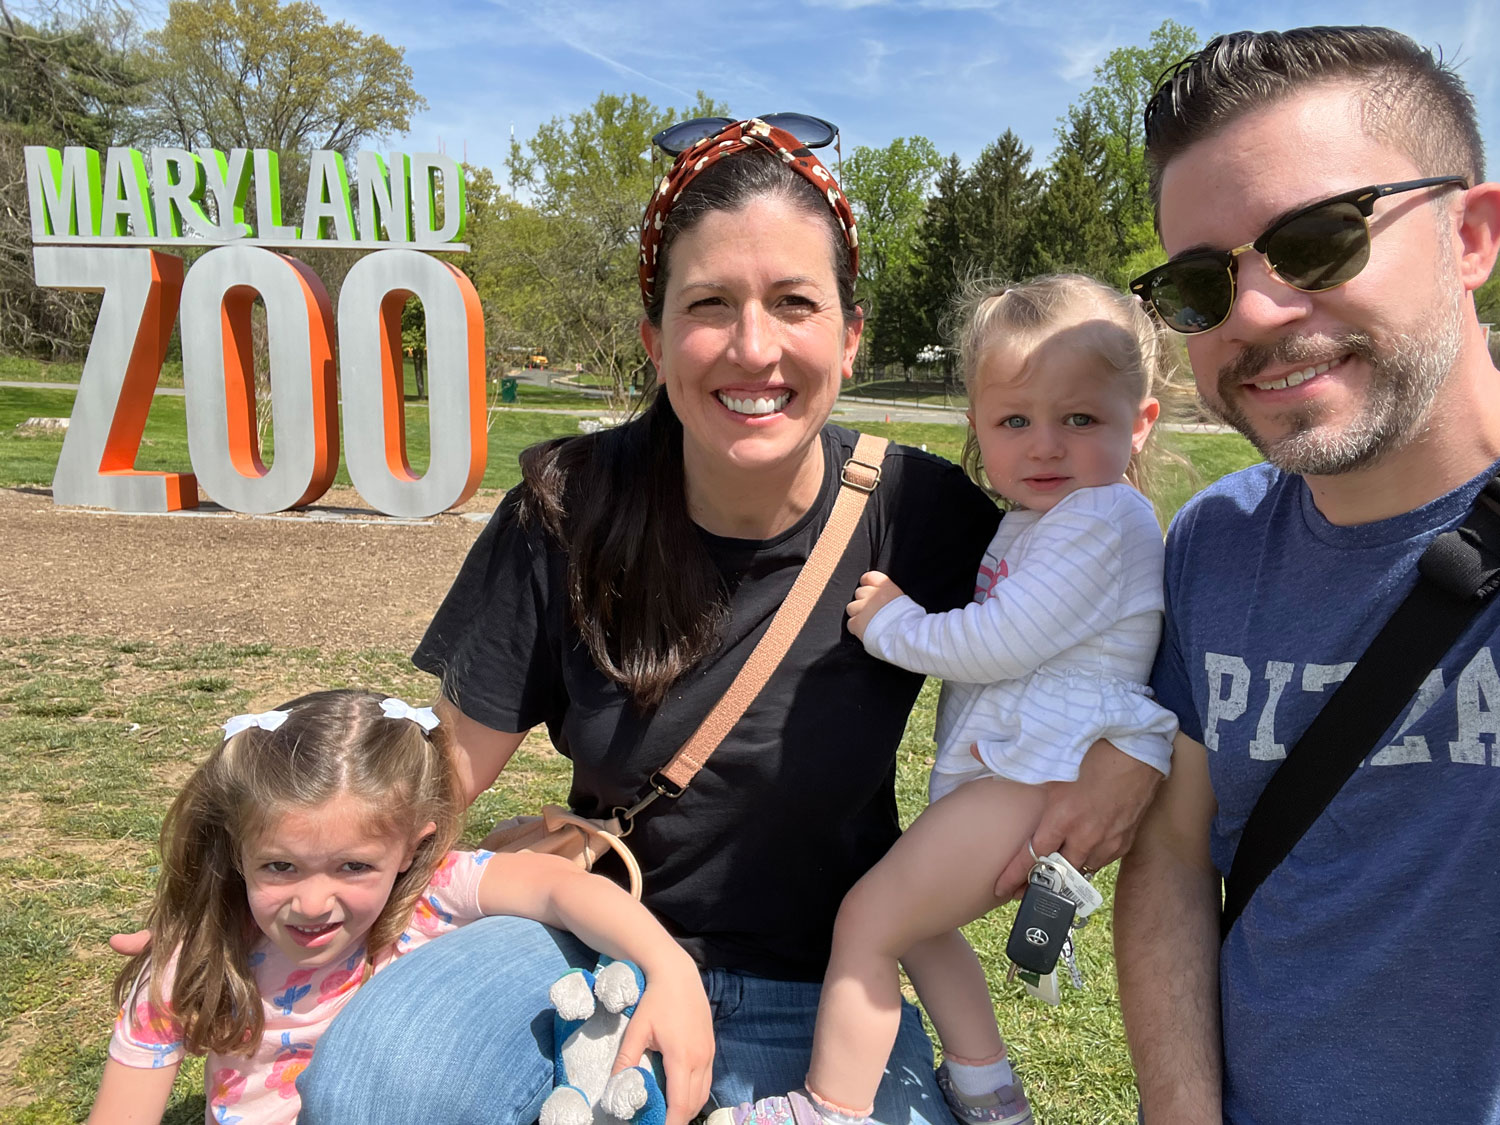 Fete at Maryland Zoo